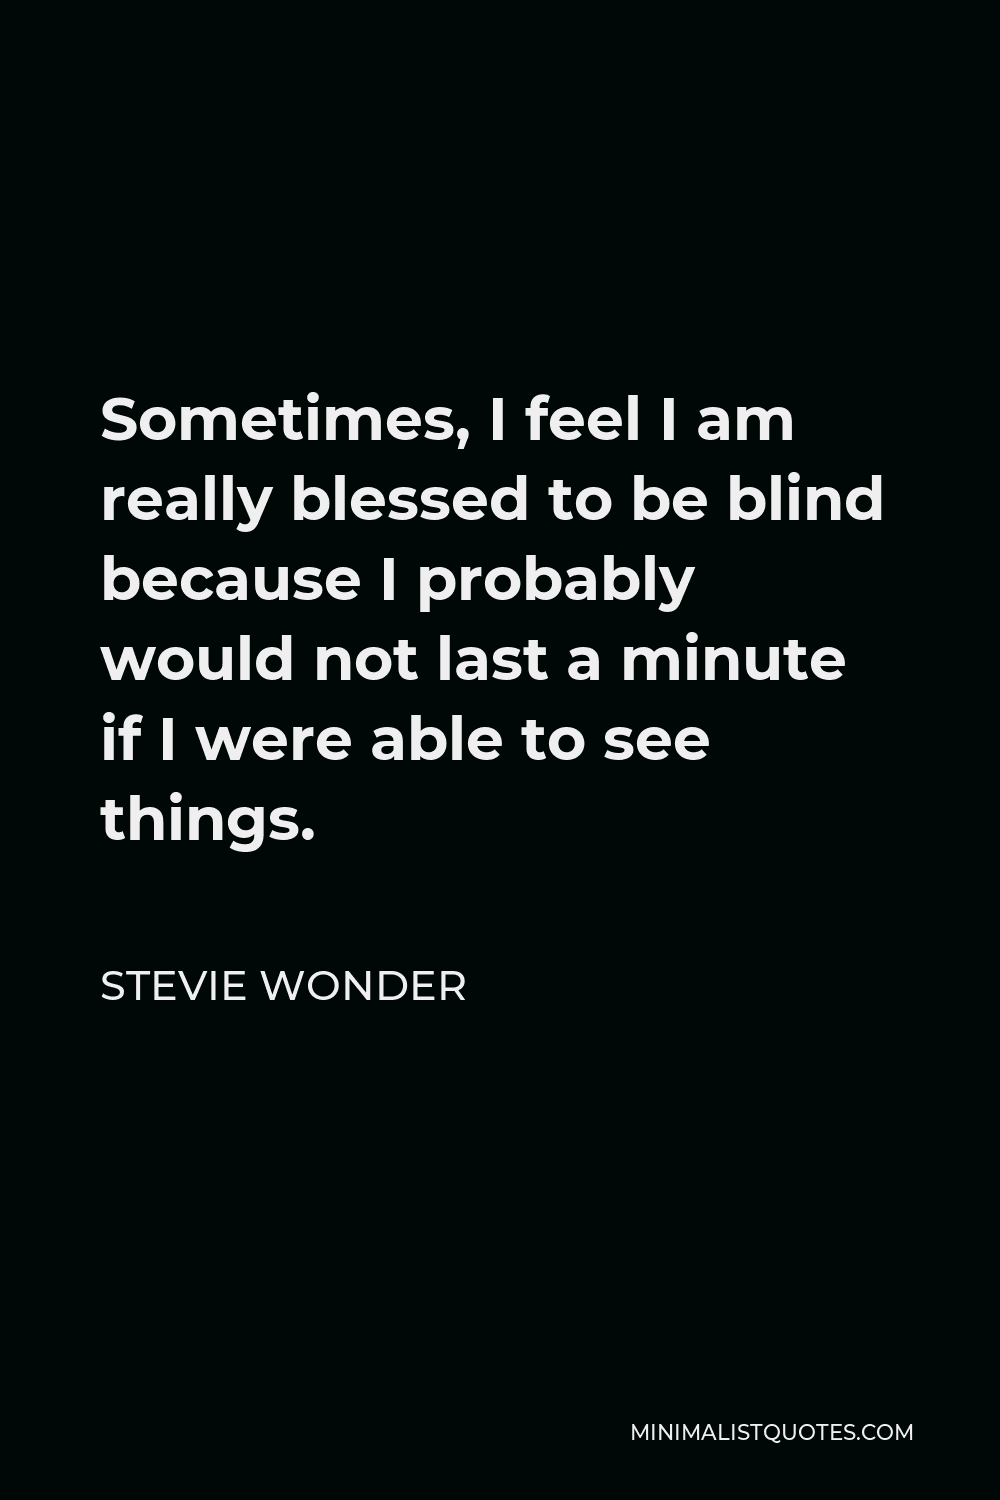 Stevie Wonder Quote - Sometimes, I feel I am really blessed to be blind because I probably would not last a minute if I were able to see things.